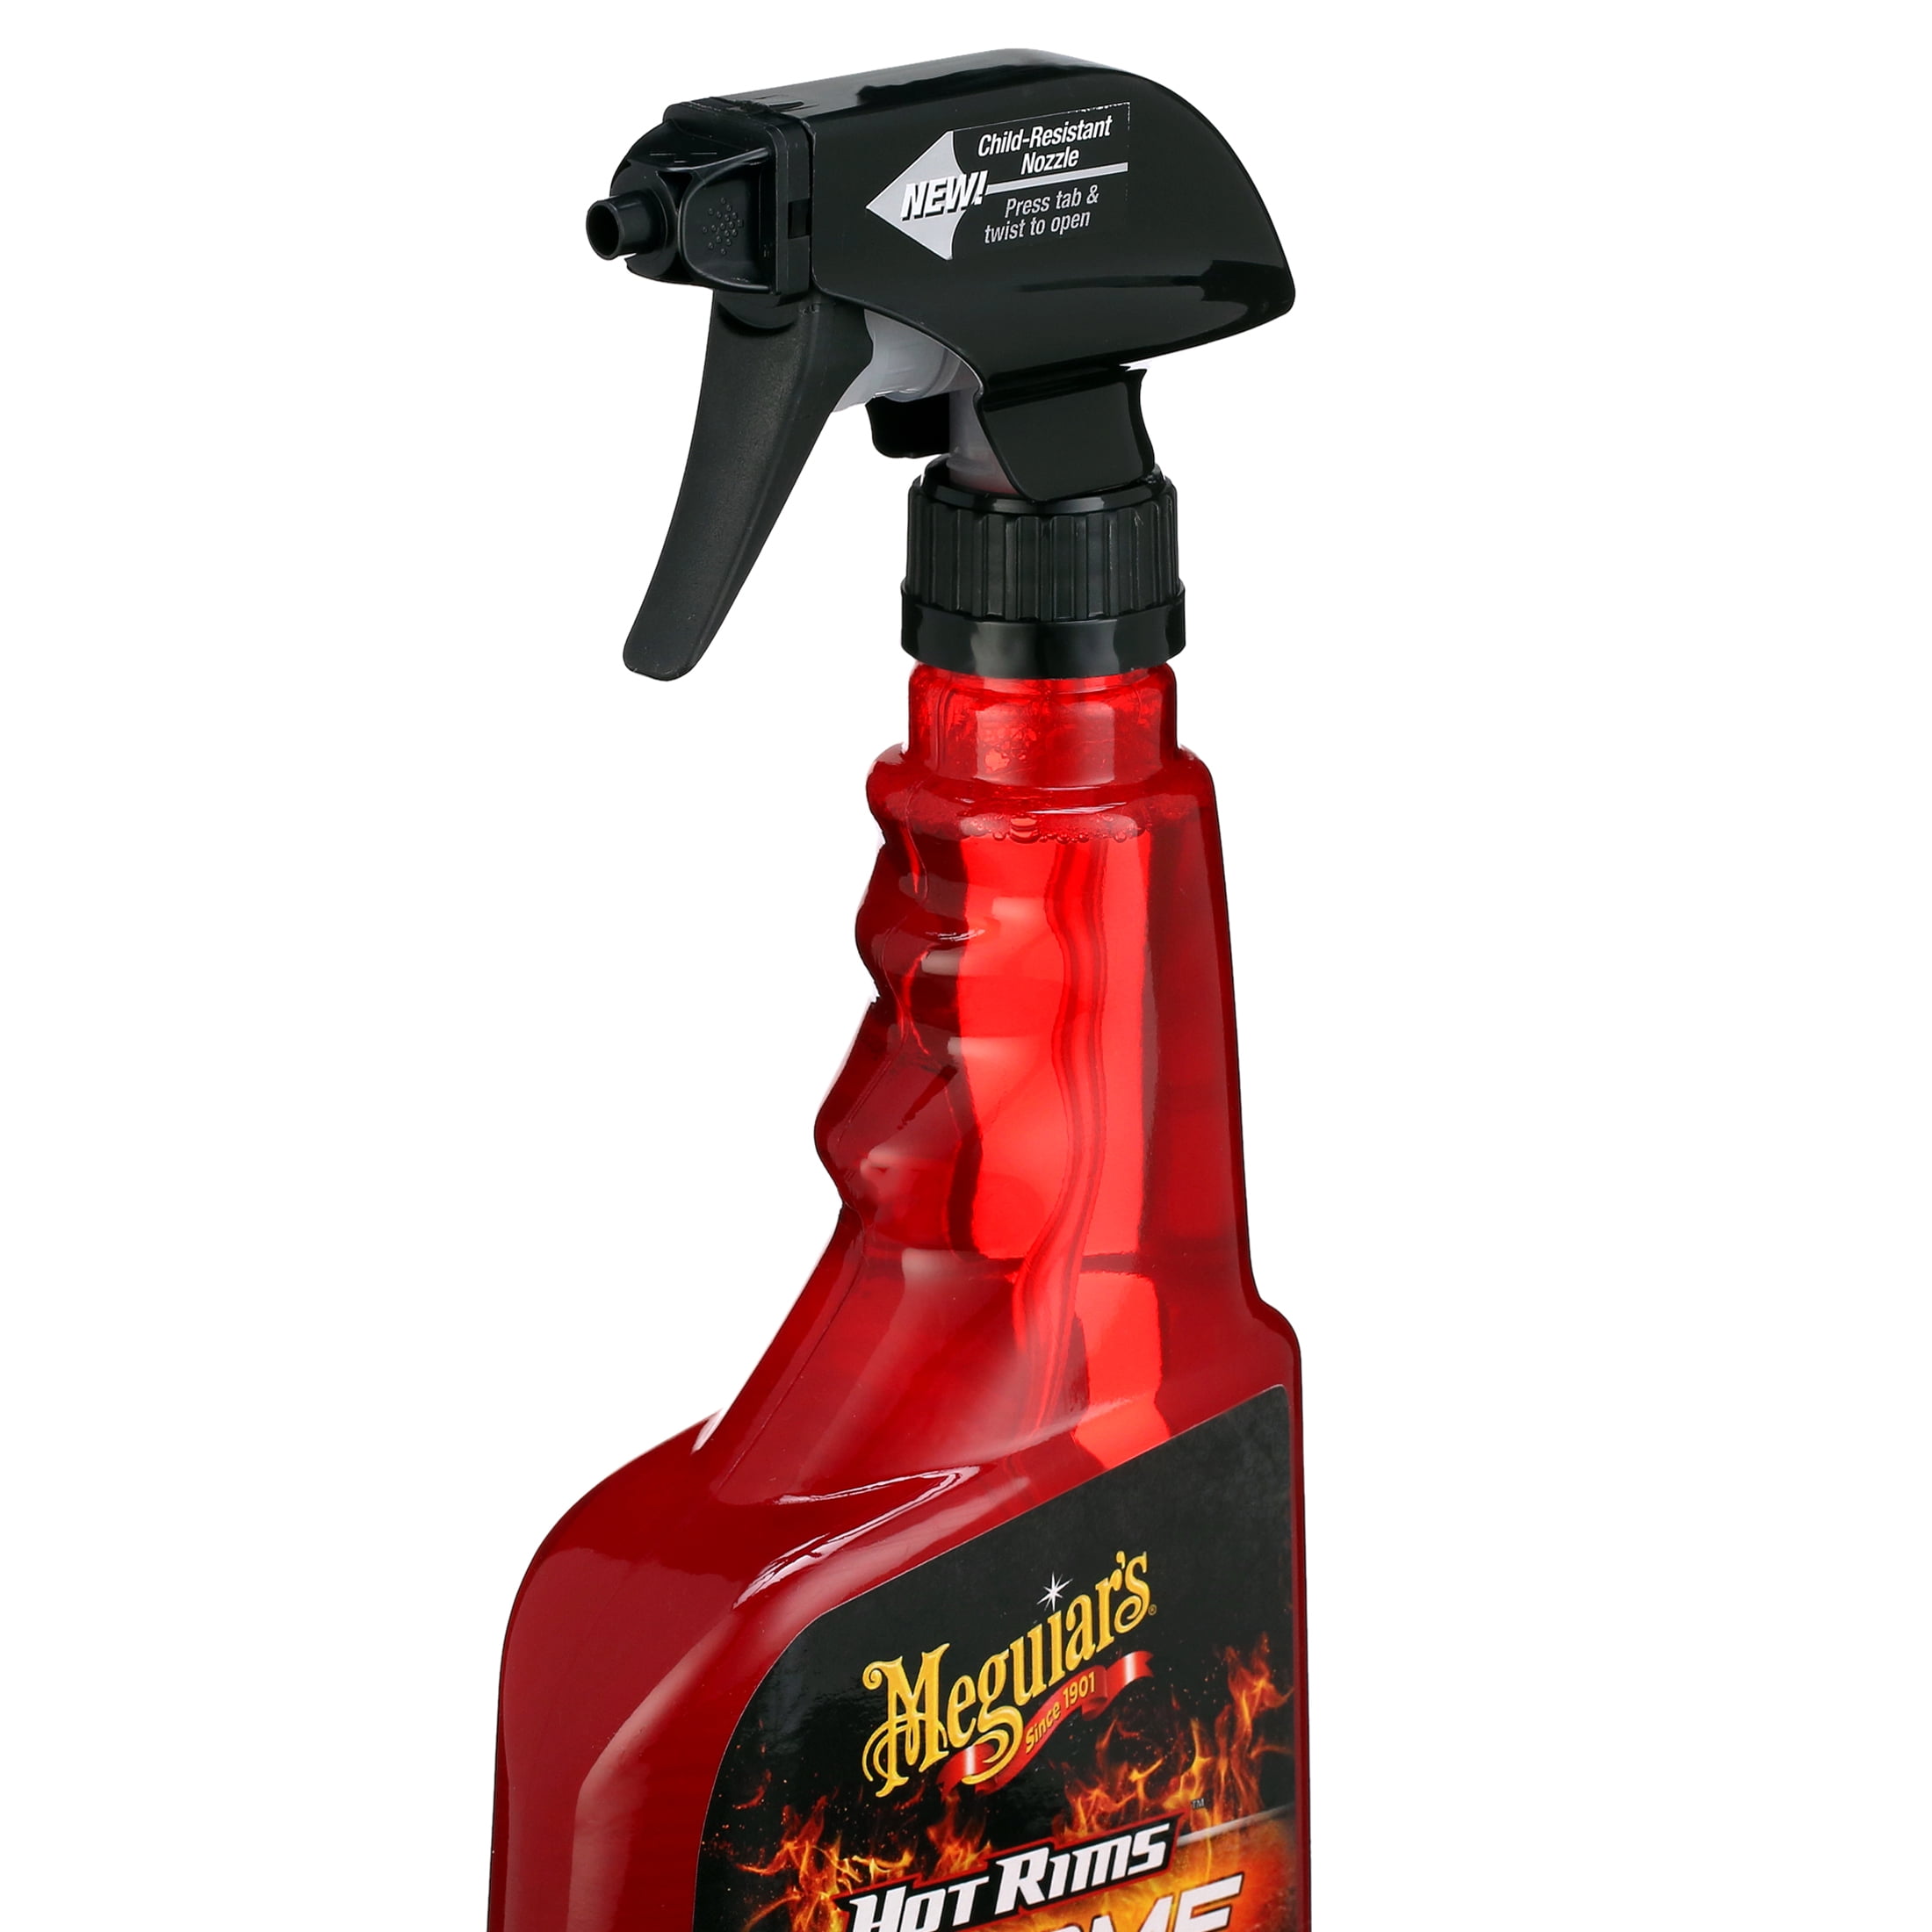 Mothers 05824 Pro-Strength Chrome Wheel Cleaner - 24 oz